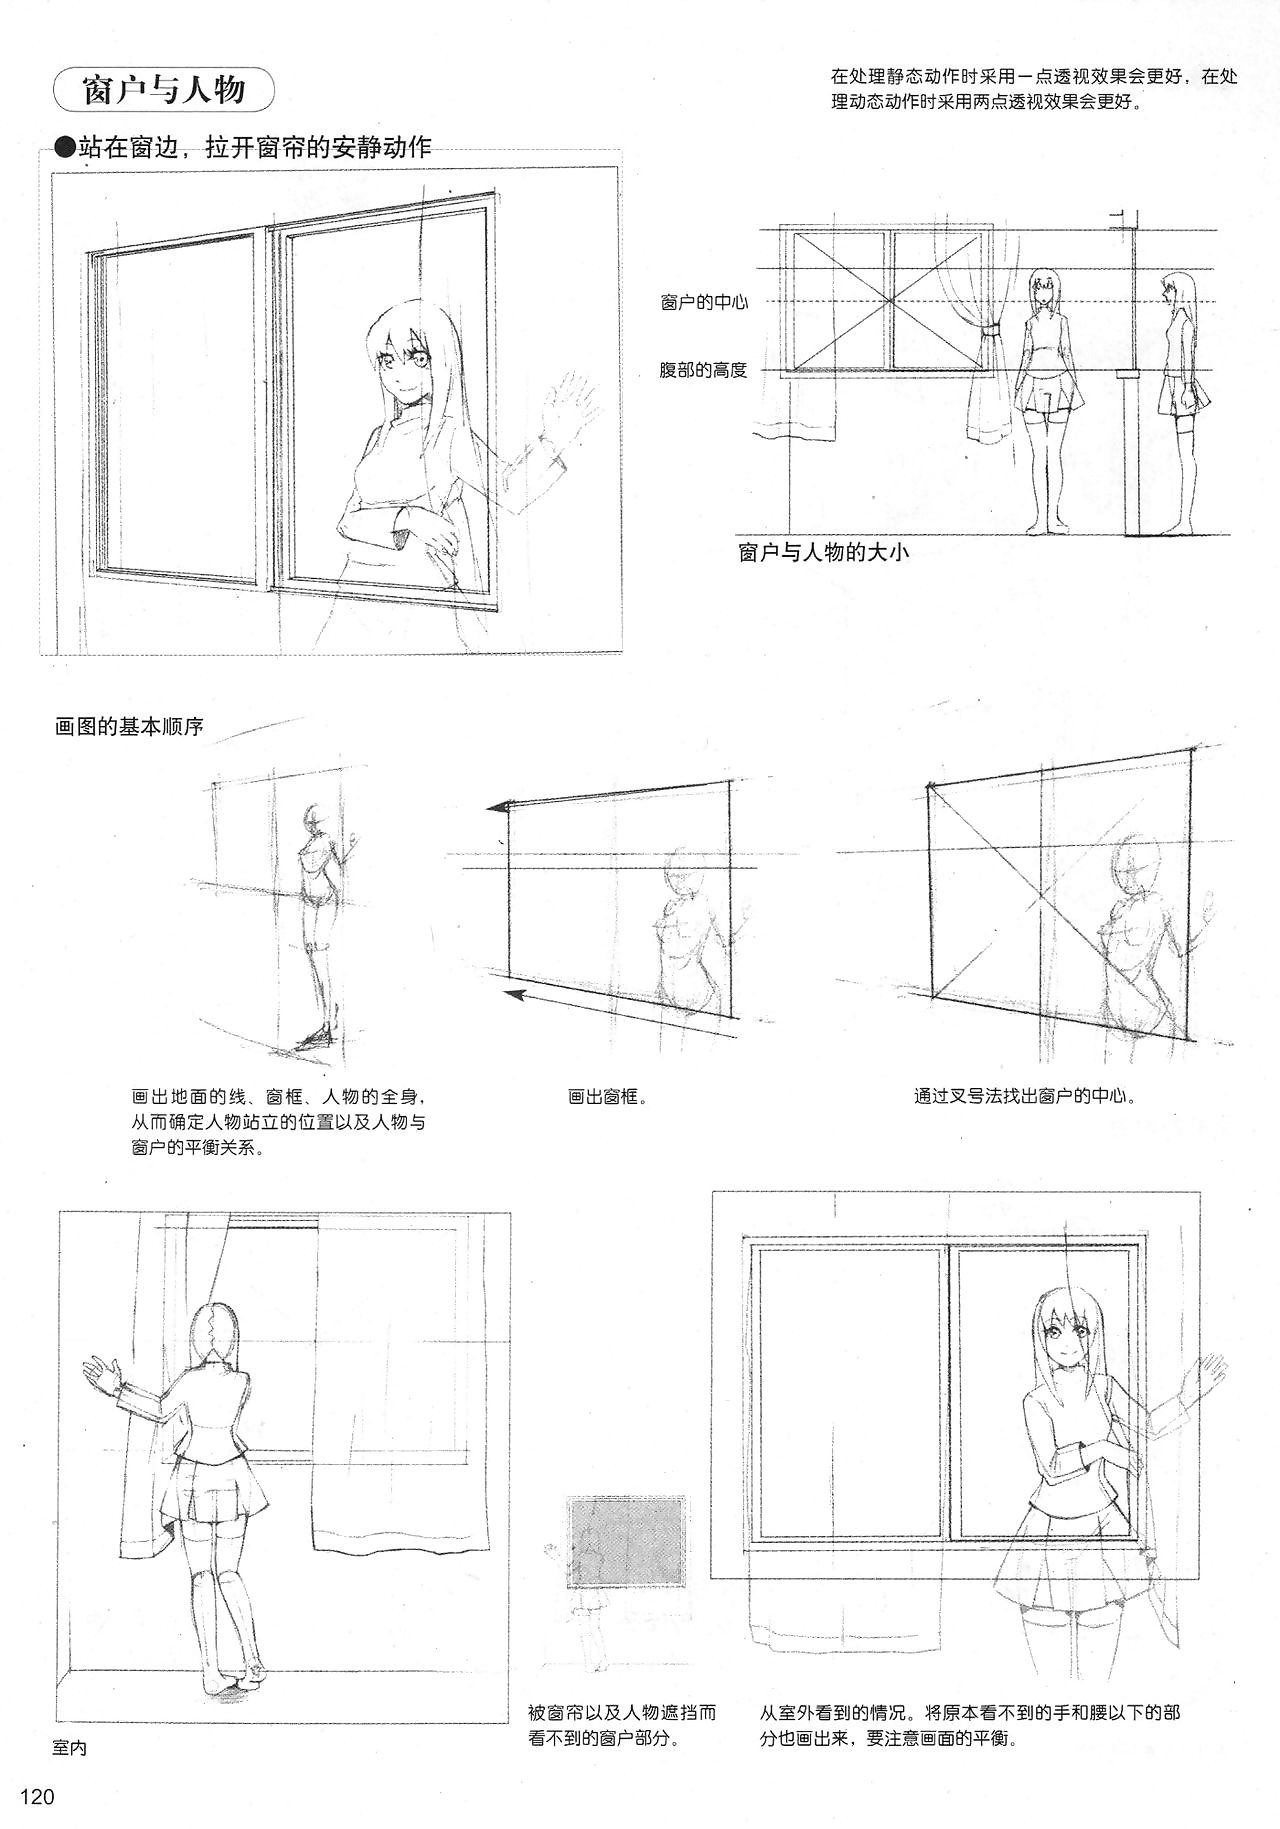 How to Draw Manga: Sketching Manga-Style Volume 4: All About Perspective - part 7